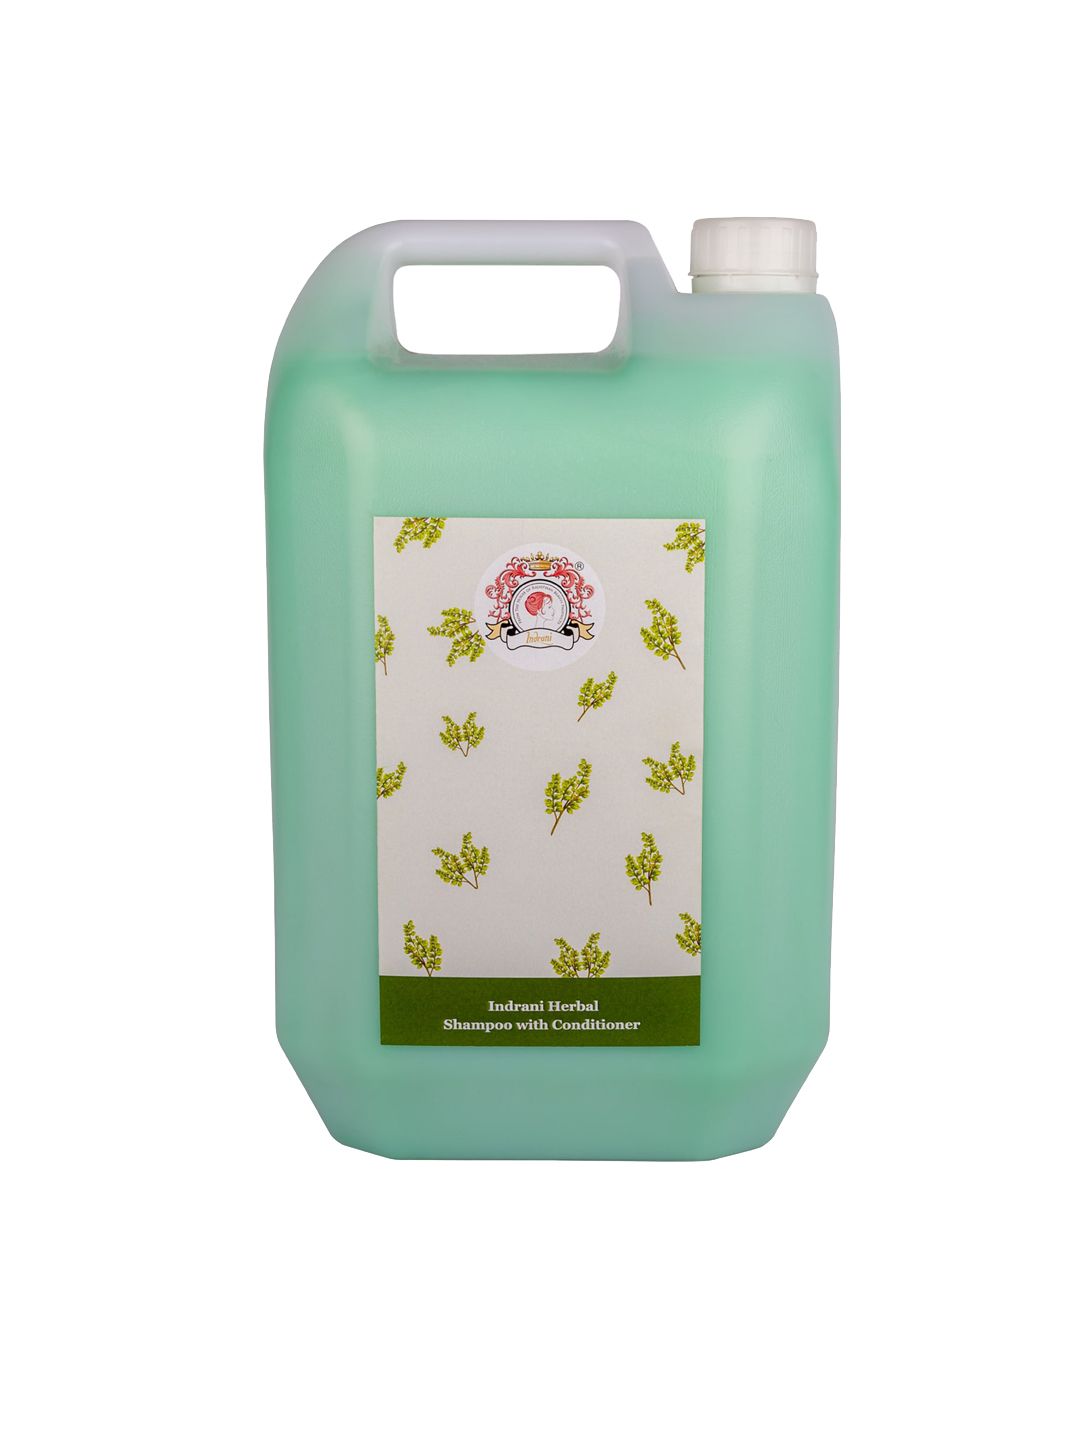 Indrani Cosmetics Herbal Shampoo With Conditioner 5 L Price in India